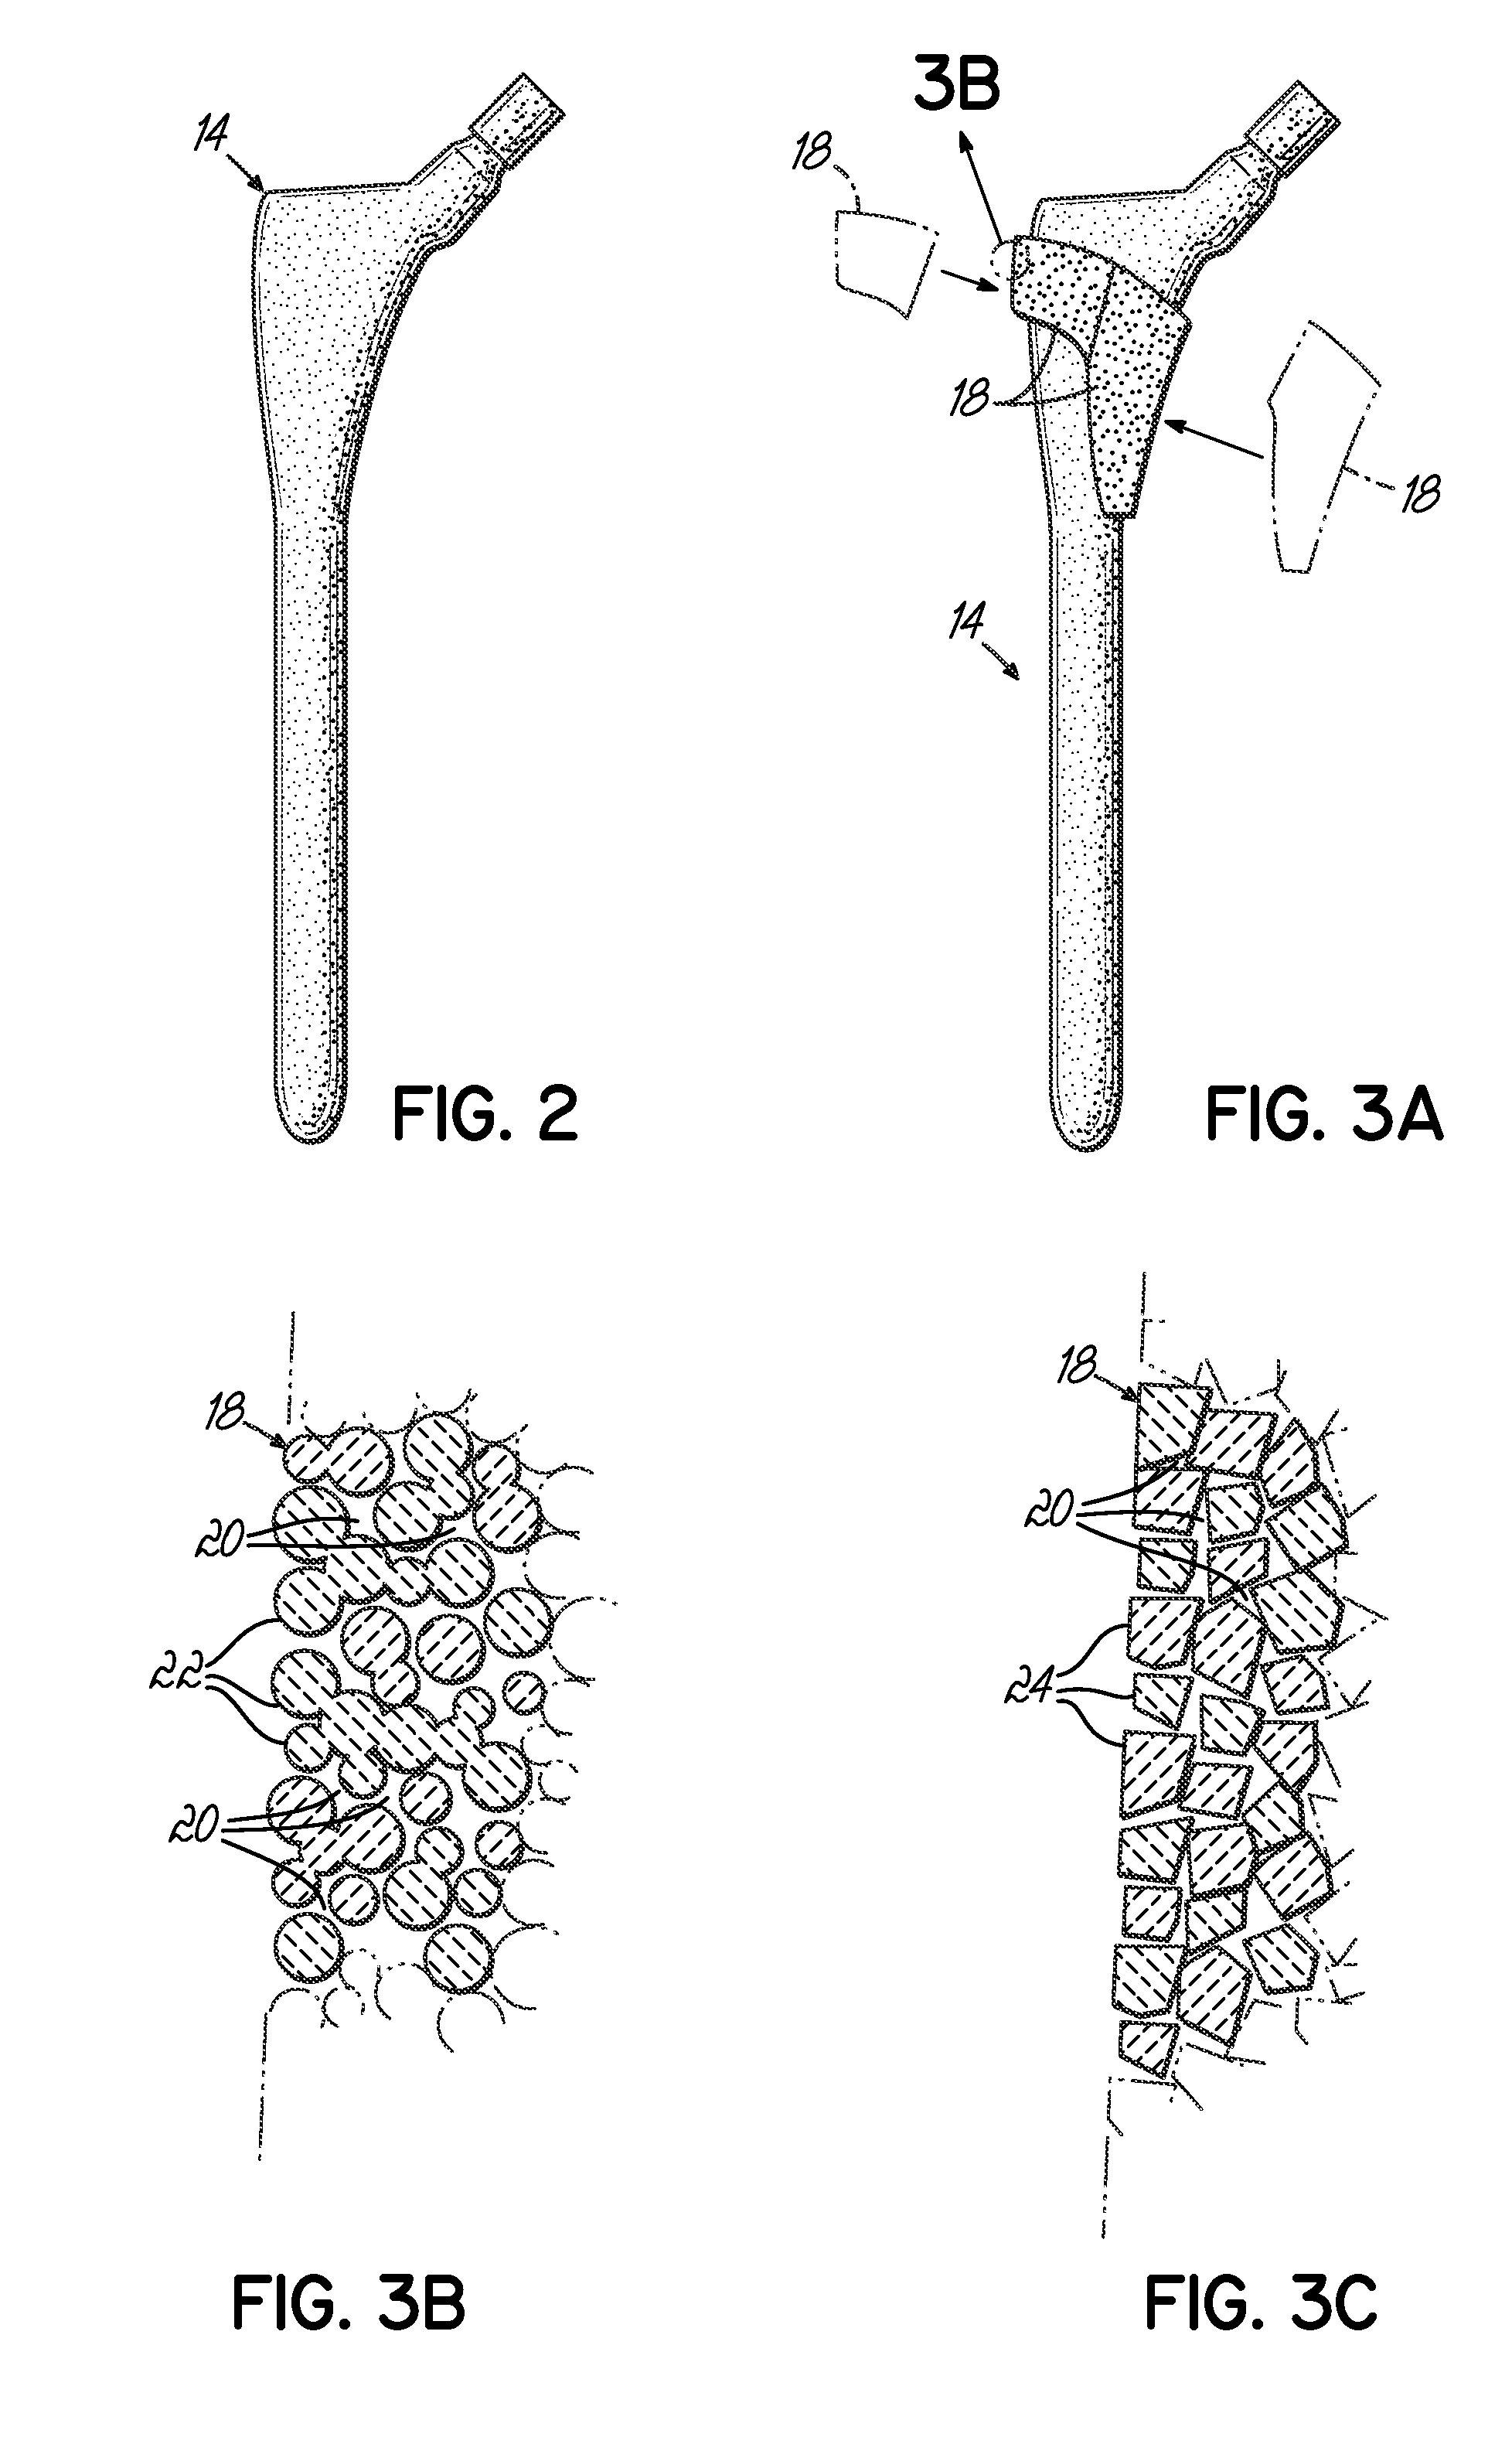 Method for forming an integral porous region in a cast implant